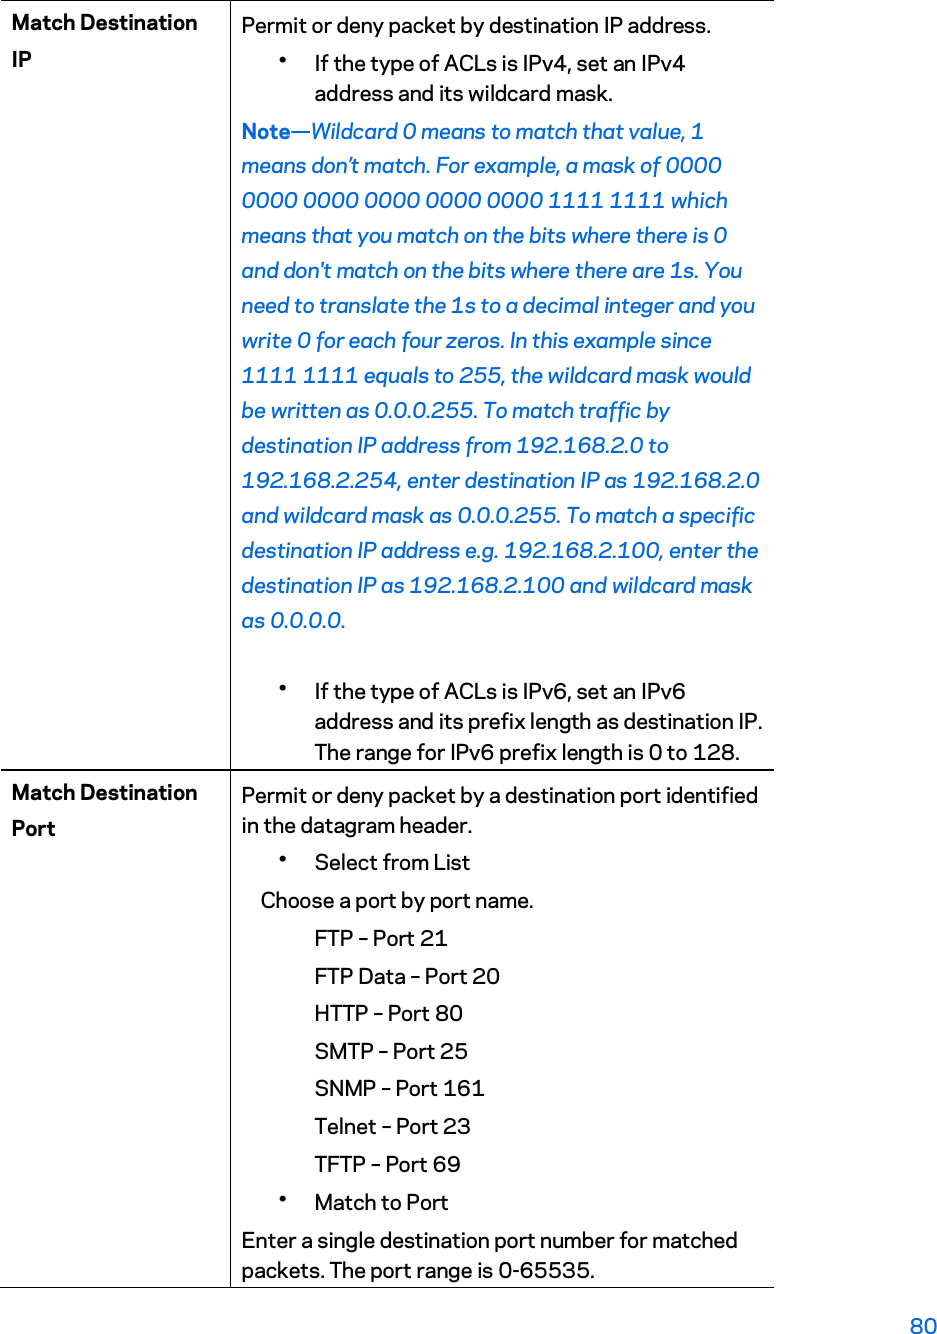 Match Destination IP Permit or deny packet by destination IP address. yIf the type of ACLs is IPv4, set an IPv4 address and its wildcard mask. Note—Wildcard 0 means to match that value, 1 means don’t match. For example, a mask of 0000 0000 0000 0000 0000 0000 1111 1111 which means that you match on the bits where there is 0 and don&apos;t match on the bits where there are 1s. You need to translate the 1s to a decimal integer and you write 0 for each four zeros. In this example since 1111 1111 equals to 255, the wildcard mask would be written as 0.0.0.255. To match traffic by destination IP address from 192.168.2.0 to 192.168.2.254, enter destination IP as 192.168.2.0 and wildcard mask as 0.0.0.255. To match a specific destination IP address e.g. 192.168.2.100, enter the destination IP as 192.168.2.100 and wildcard mask as 0.0.0.0.  yIf the type of ACLs is IPv6, set an IPv6 address and its prefix length as destination IP. The range for IPv6 prefix length is 0 to 128. Match Destination Port Permit or deny packet by a destination port identified in the datagram header. ySelect from List     Choose a port by port name.  FTP – Port 21 FTP Data – Port 20 HTTP – Port 80 SMTP – Port 25 SNMP – Port 161 Telnet – Port 23 TFTP – Port 69 yMatch to Port Enter a single destination port number for matched packets. The port range is 0-65535. 80 